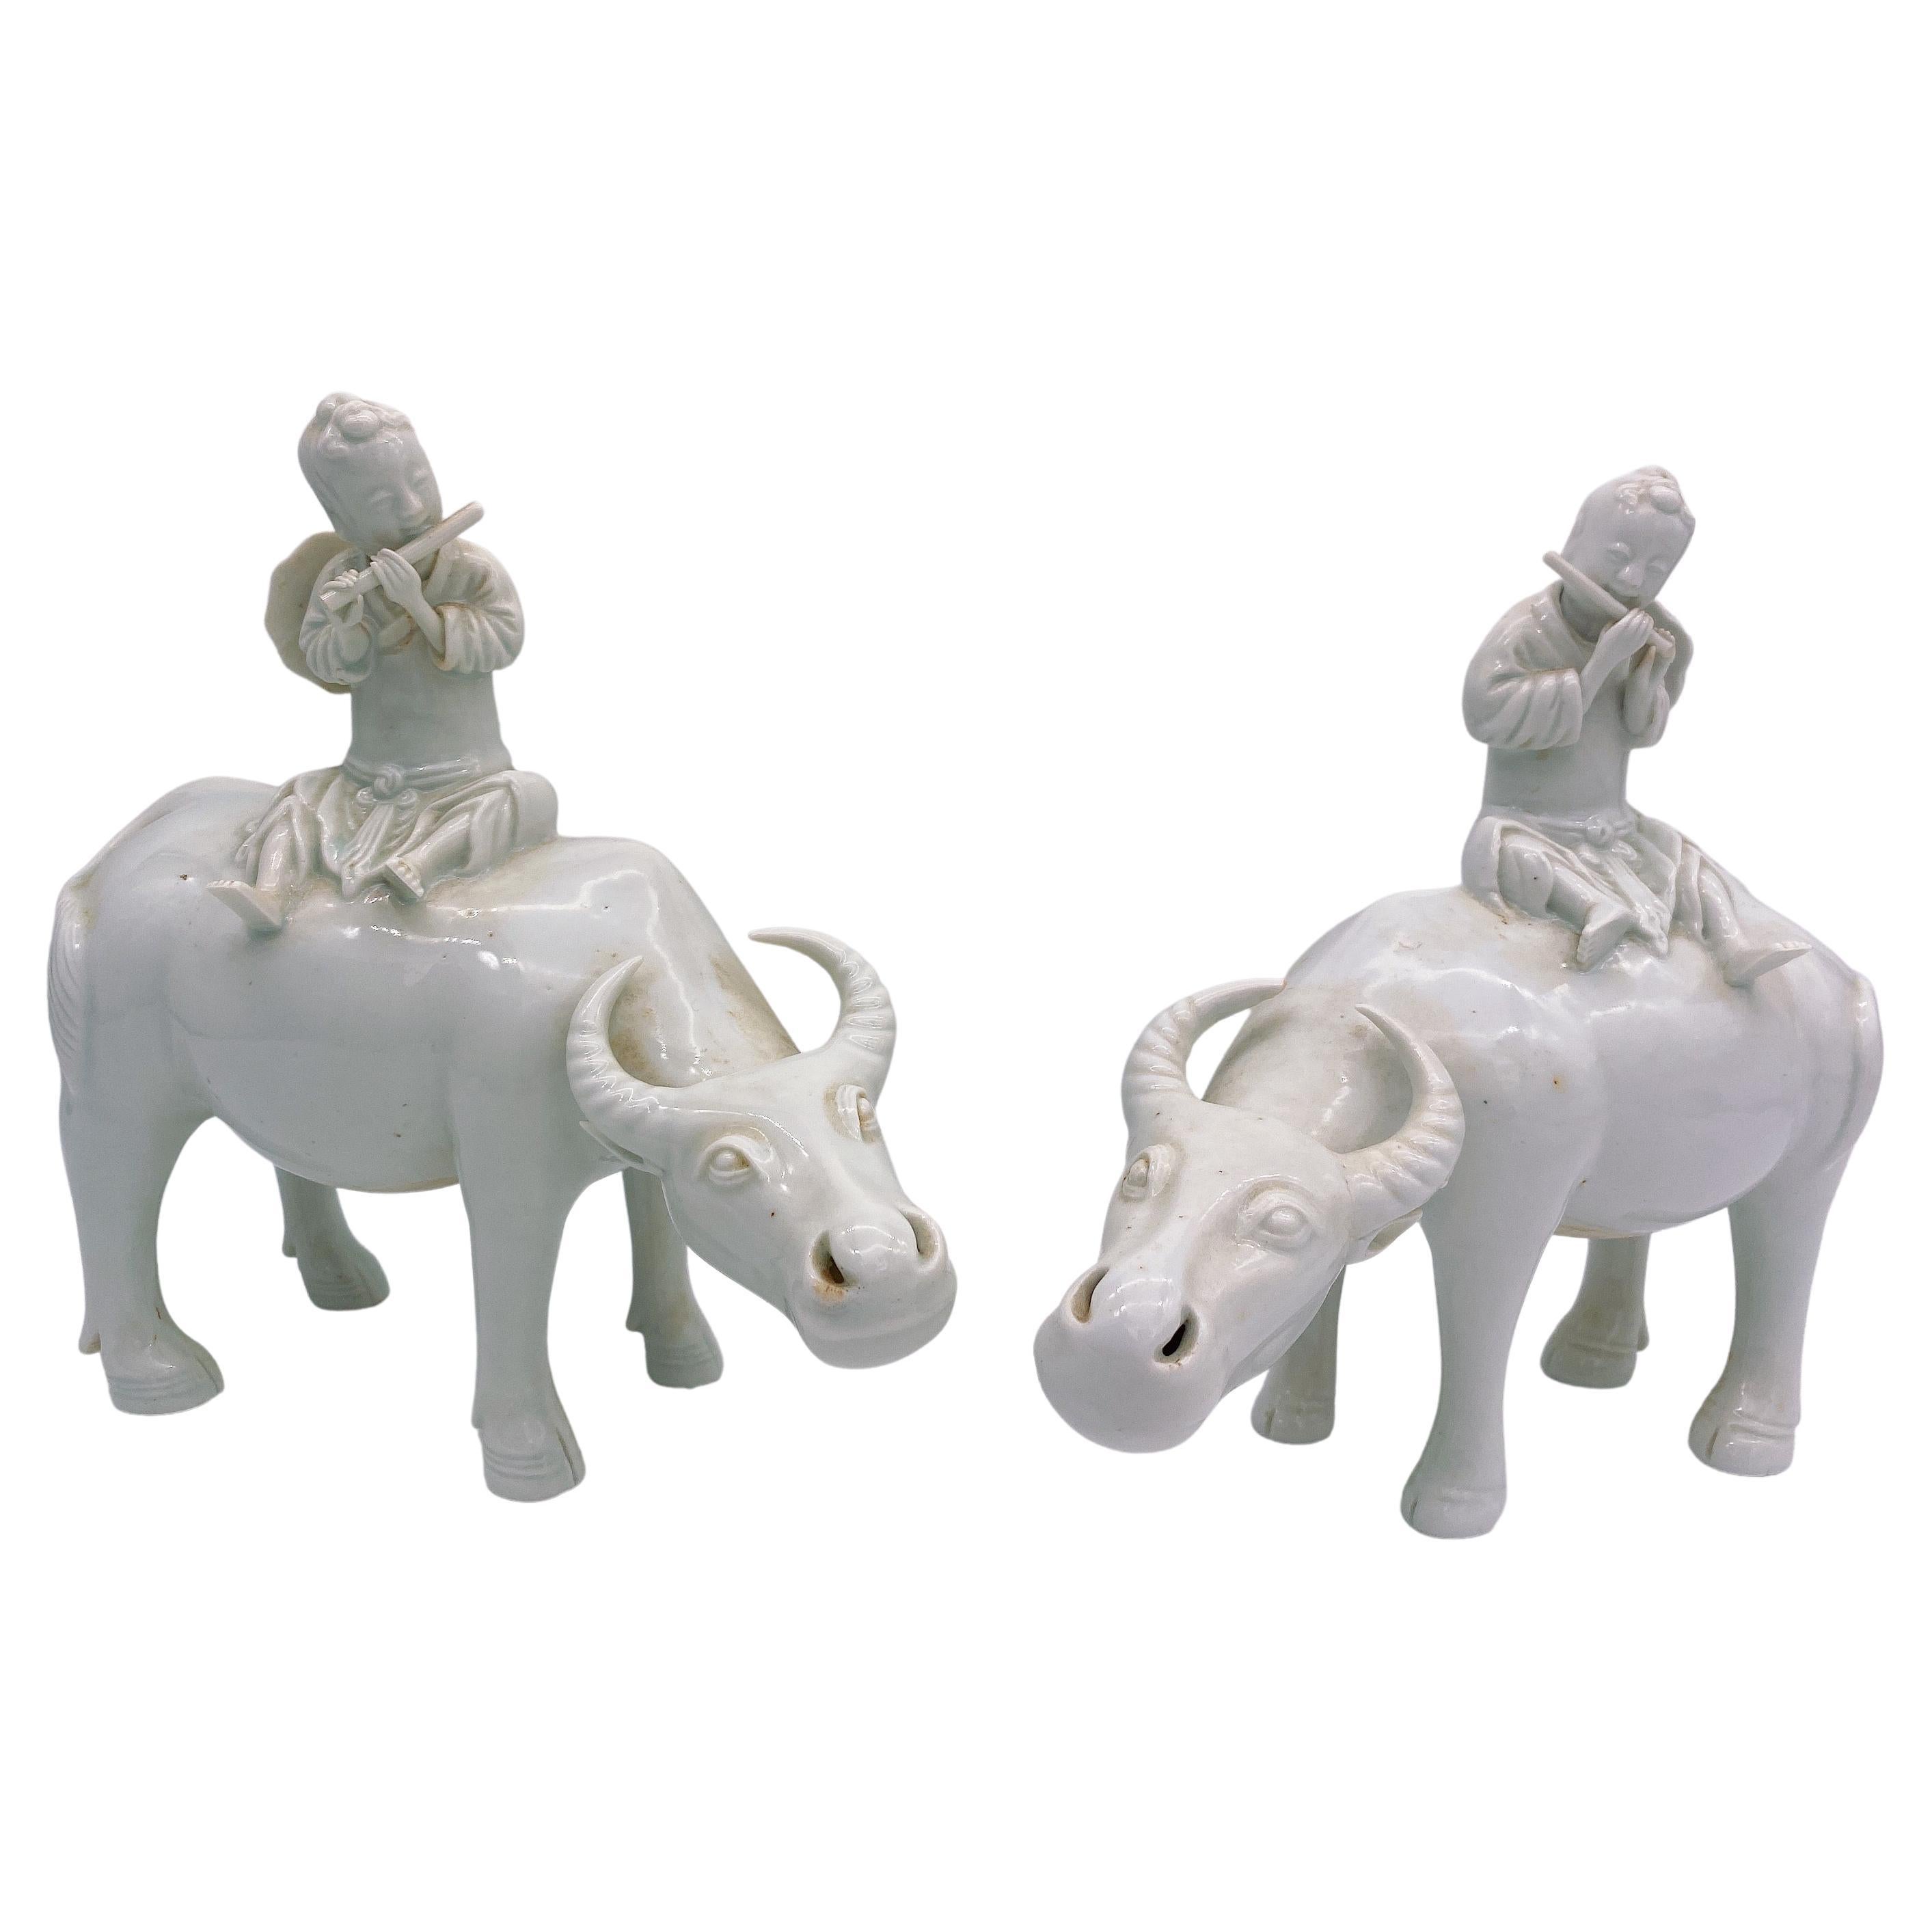 Antique Pair of Chinese Dehua Porcelain Figures of Boys on Water Buffalos